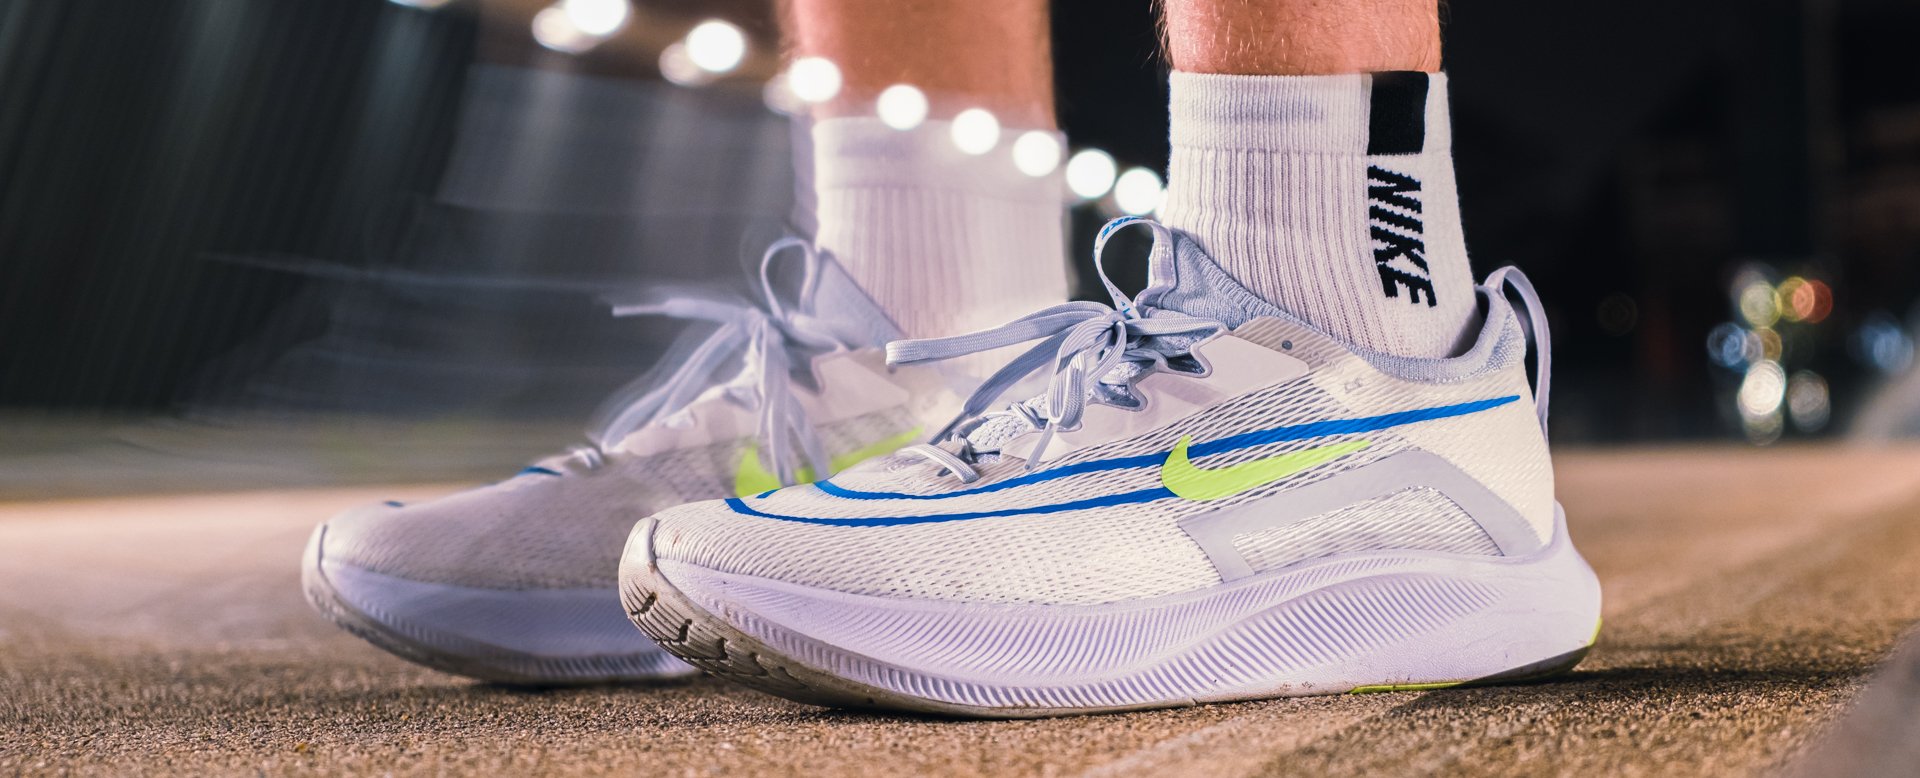 Nike Zoom 4 - A Vaporfly for the daily miles Inspiration